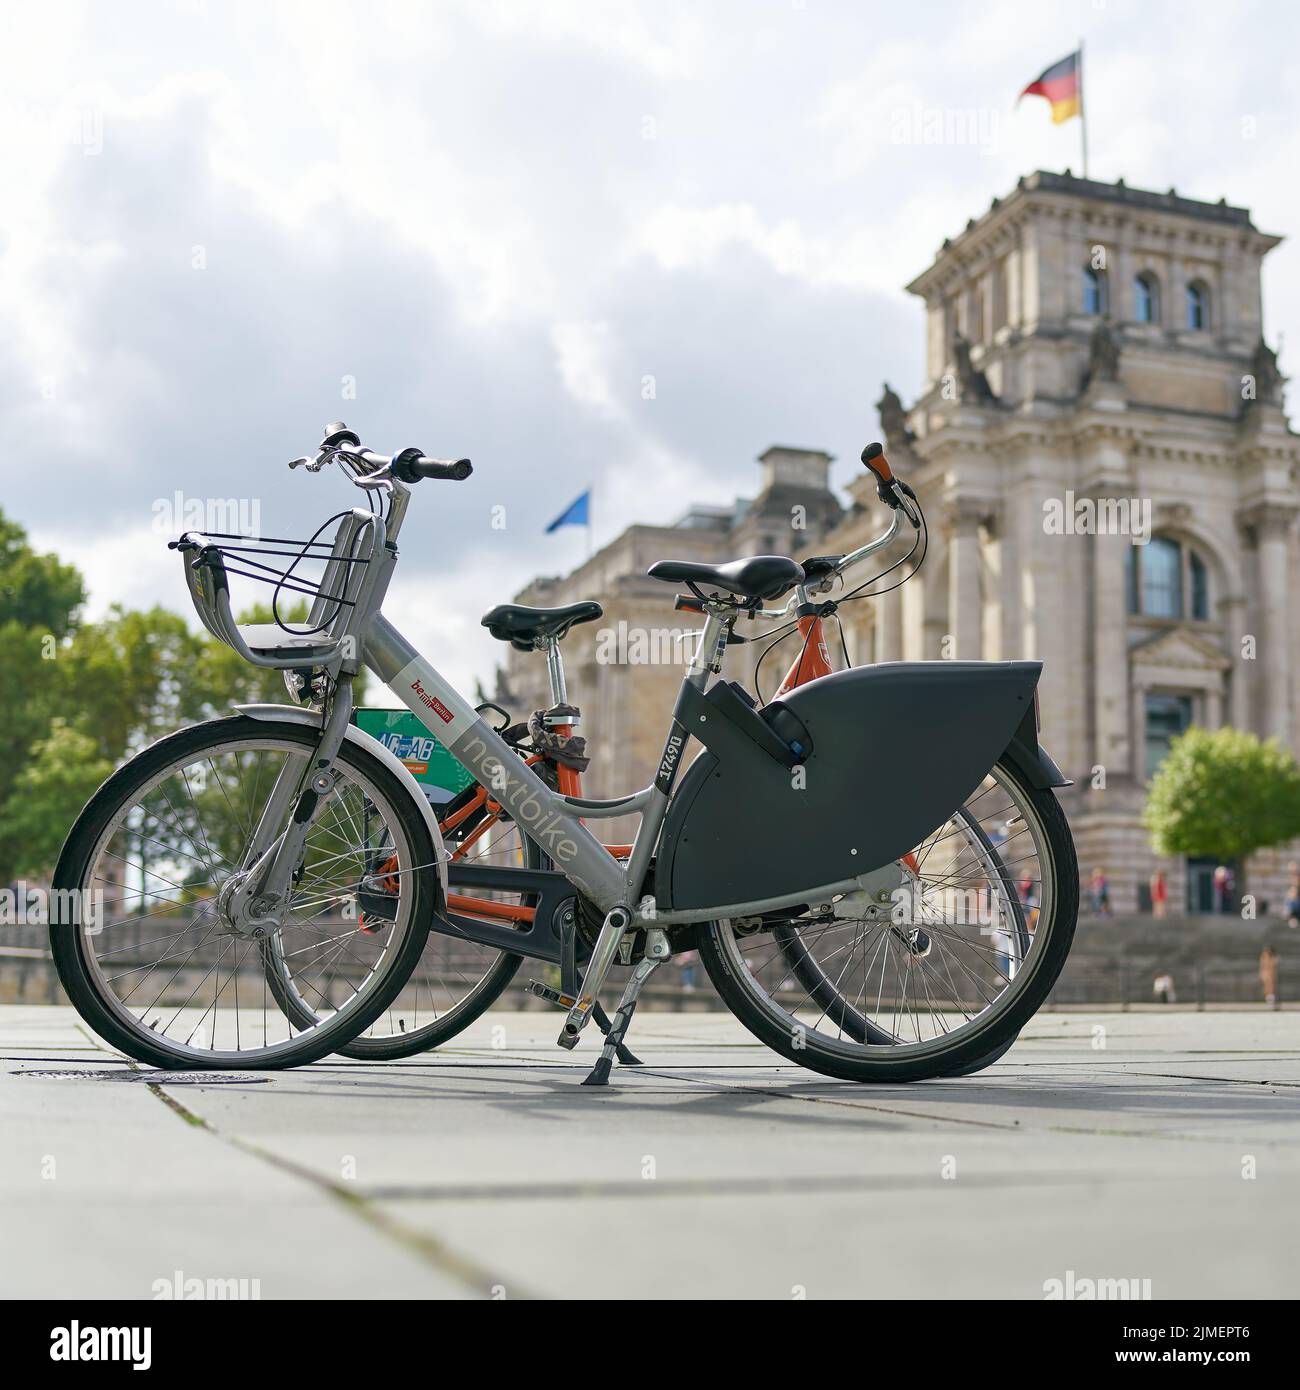 Bicycle of the public bicycle rental system of the city of Berlin Nextbike Stock Photo